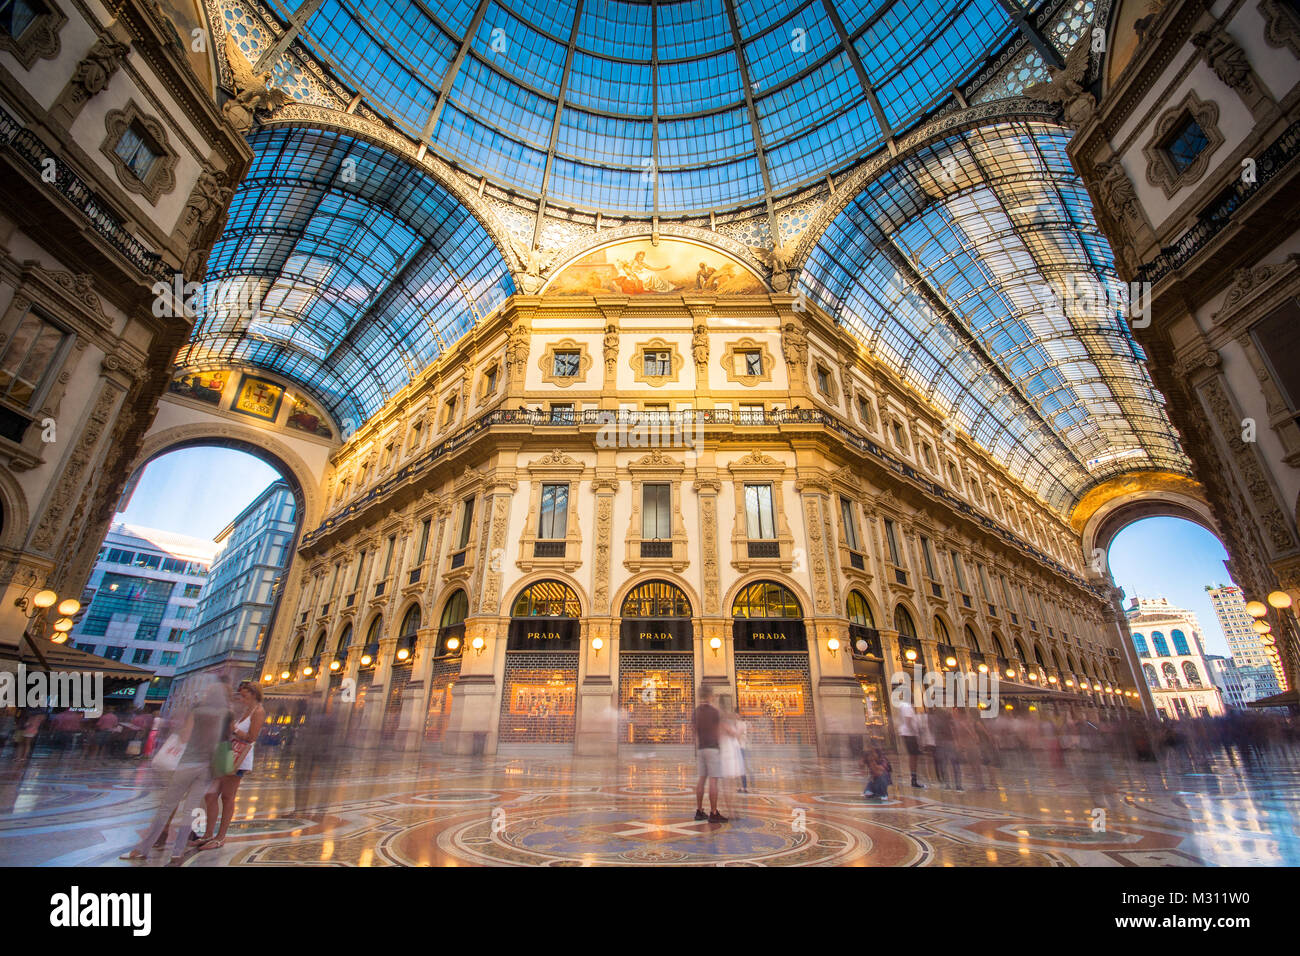 Galleria Vittorio Emanuele II, watching architecture and shopping